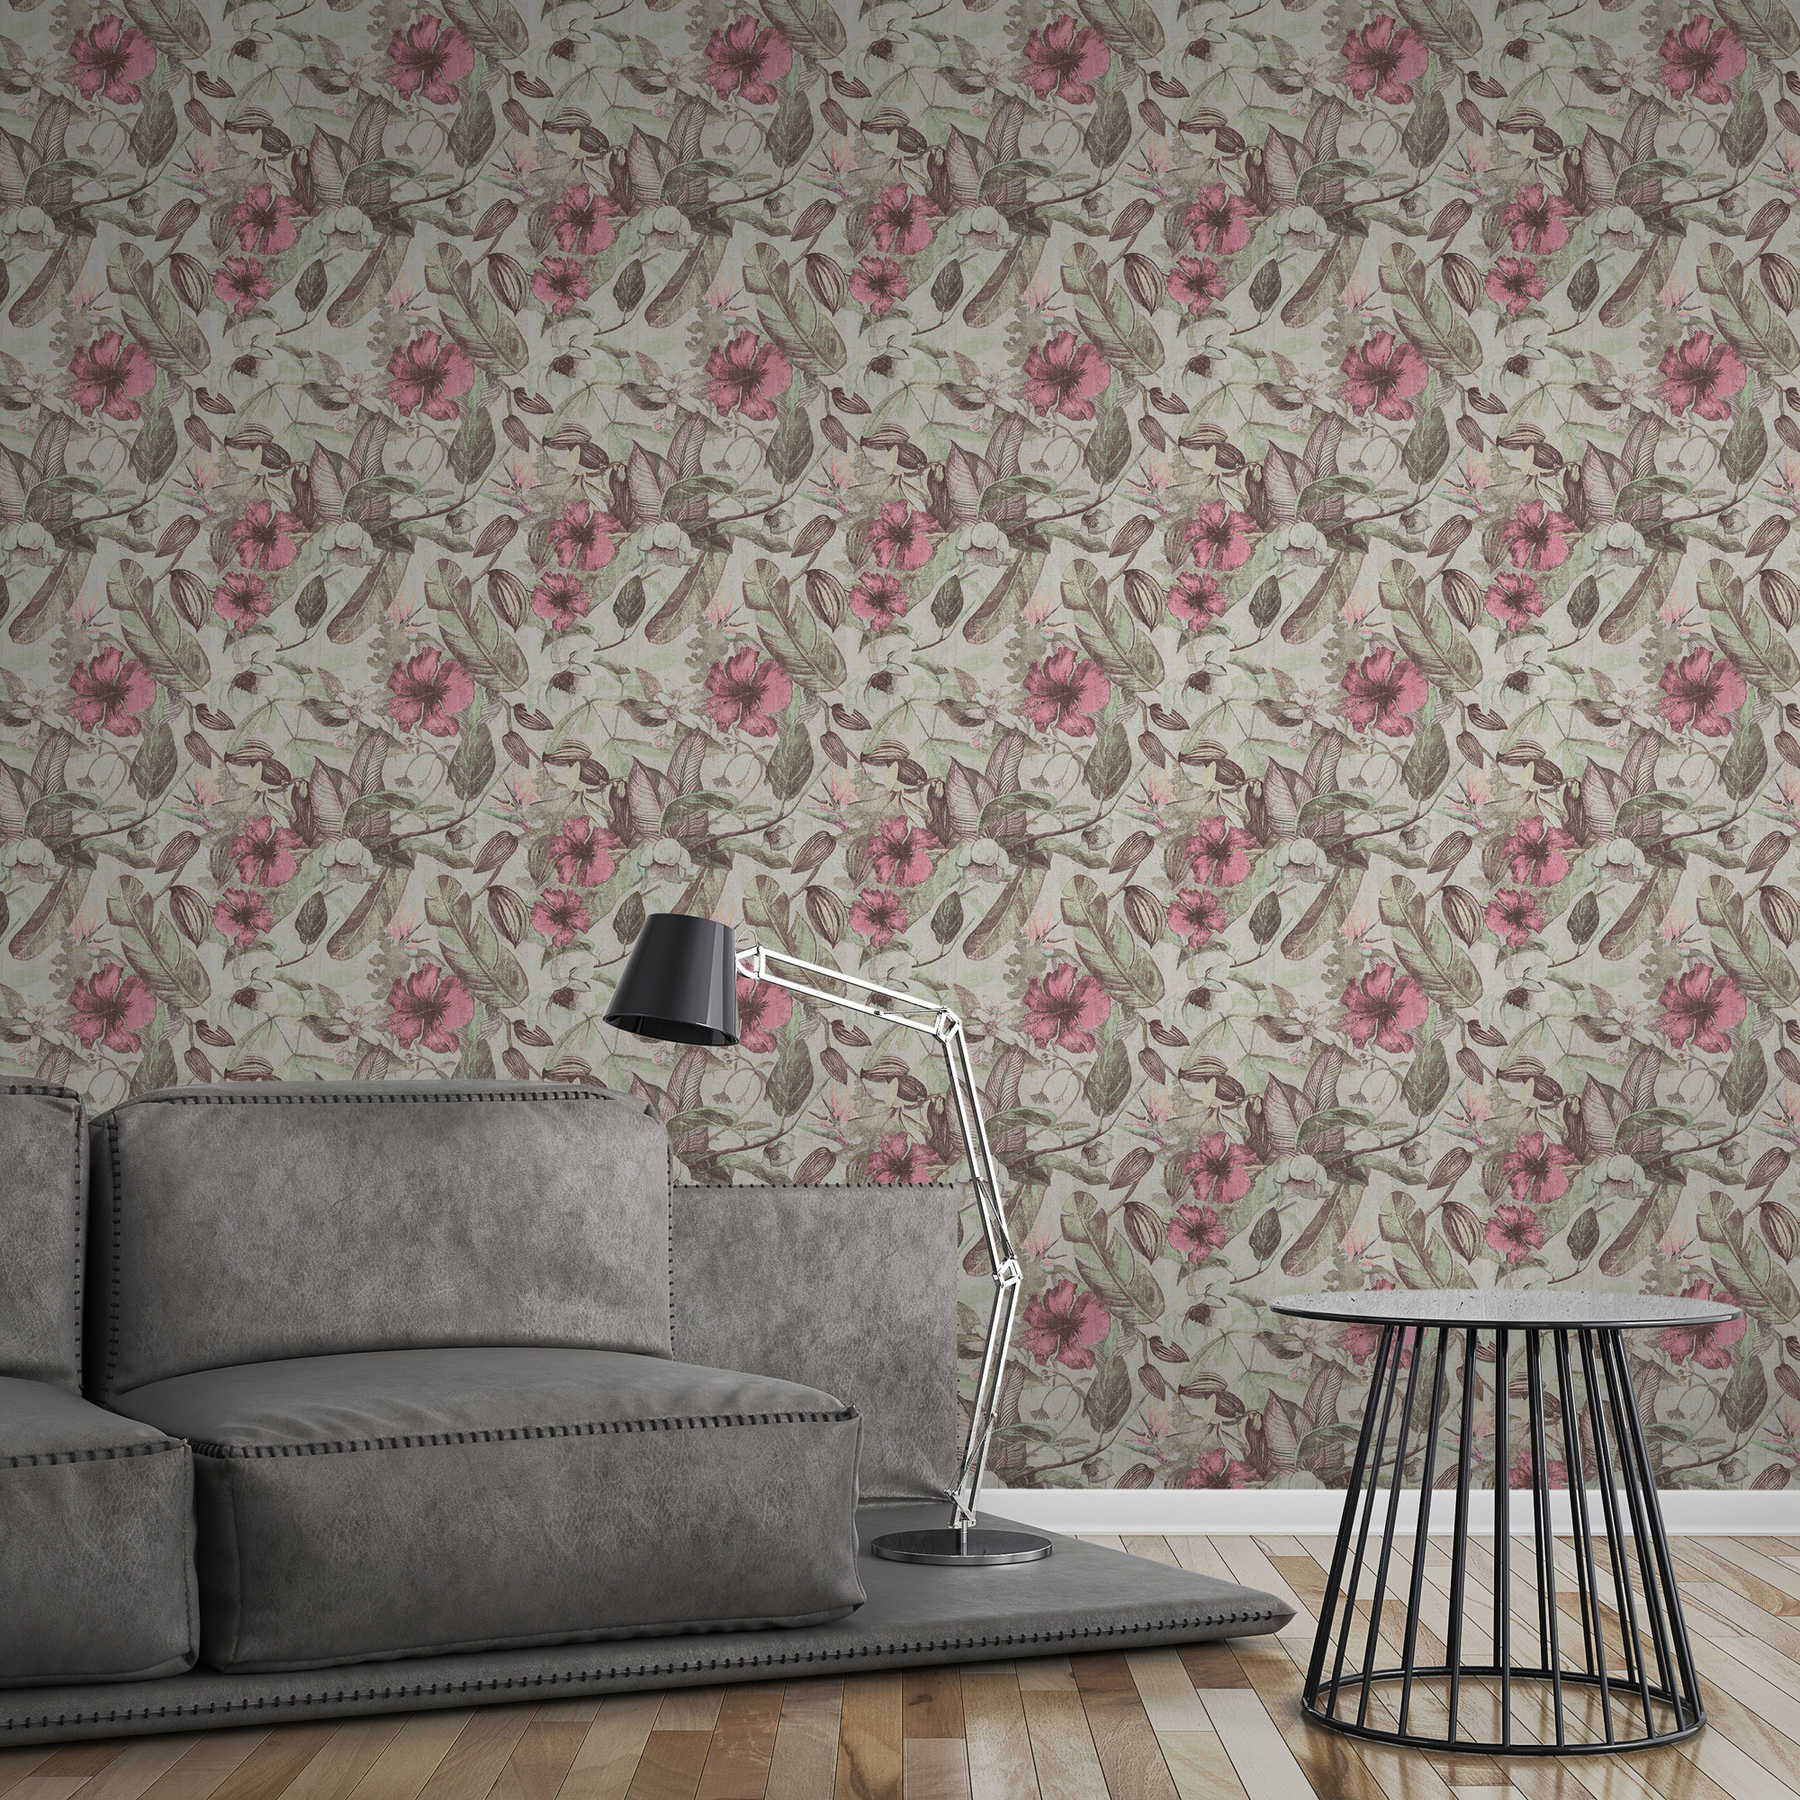             wallpaper floral pattern, tropical style & textile look - pink, green, brown
        